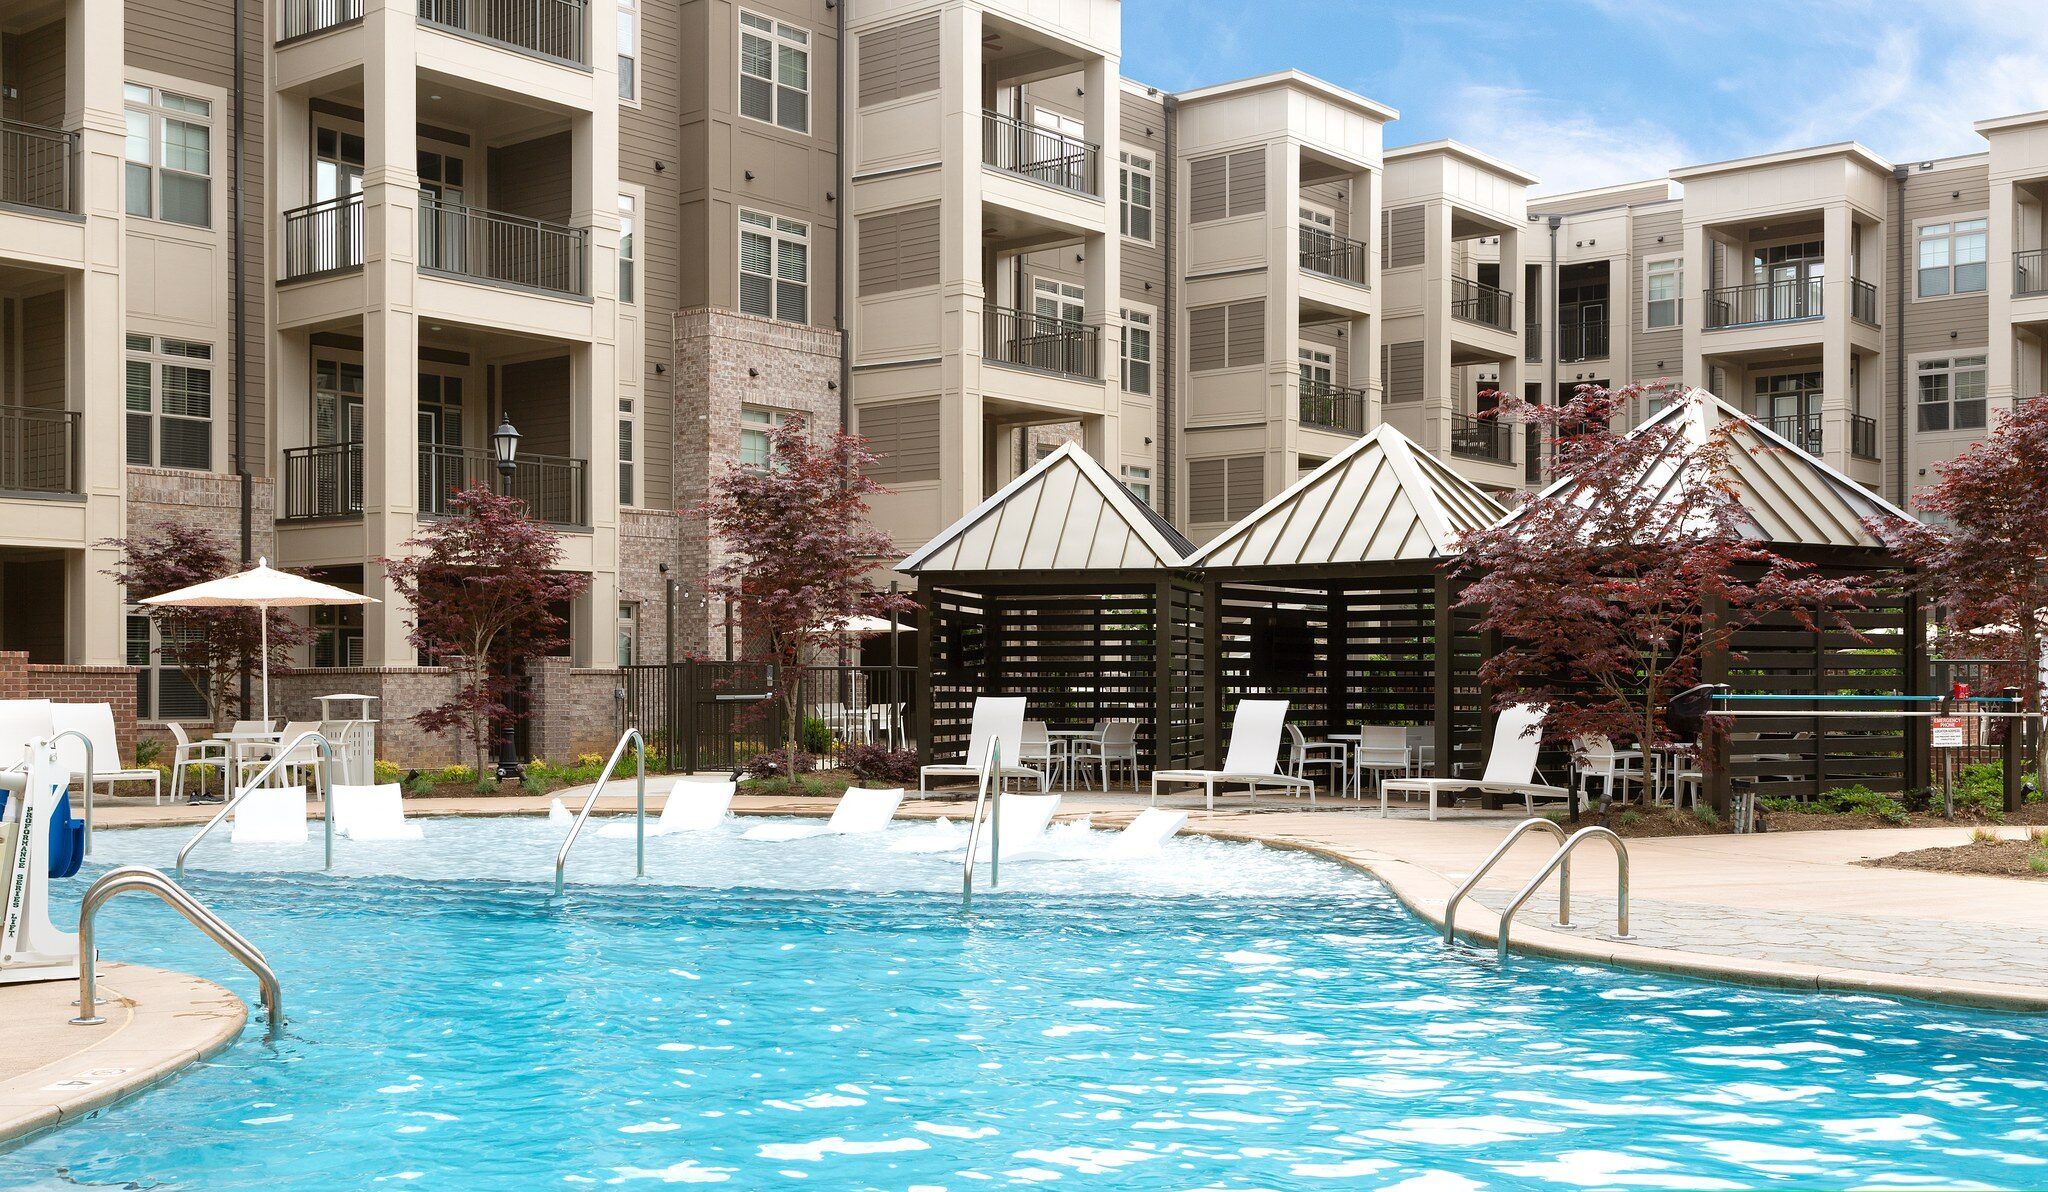 Luxury outdoor pool with lounge seating at Providence Row Apartments